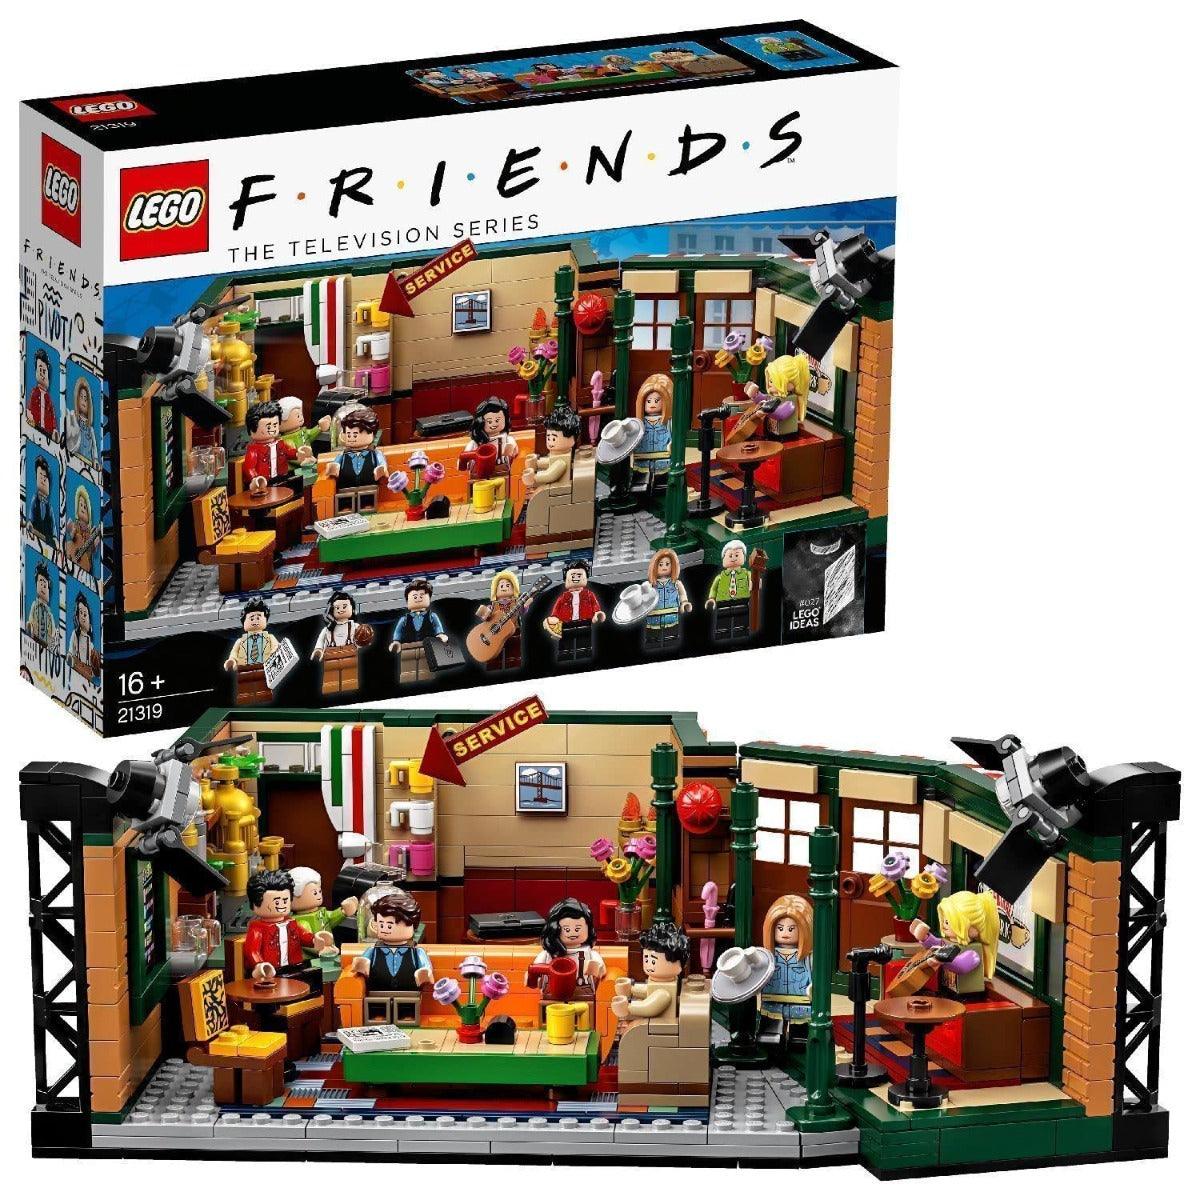 Lego The Friends Television Series Central Perk Building Kit For Ages 16+